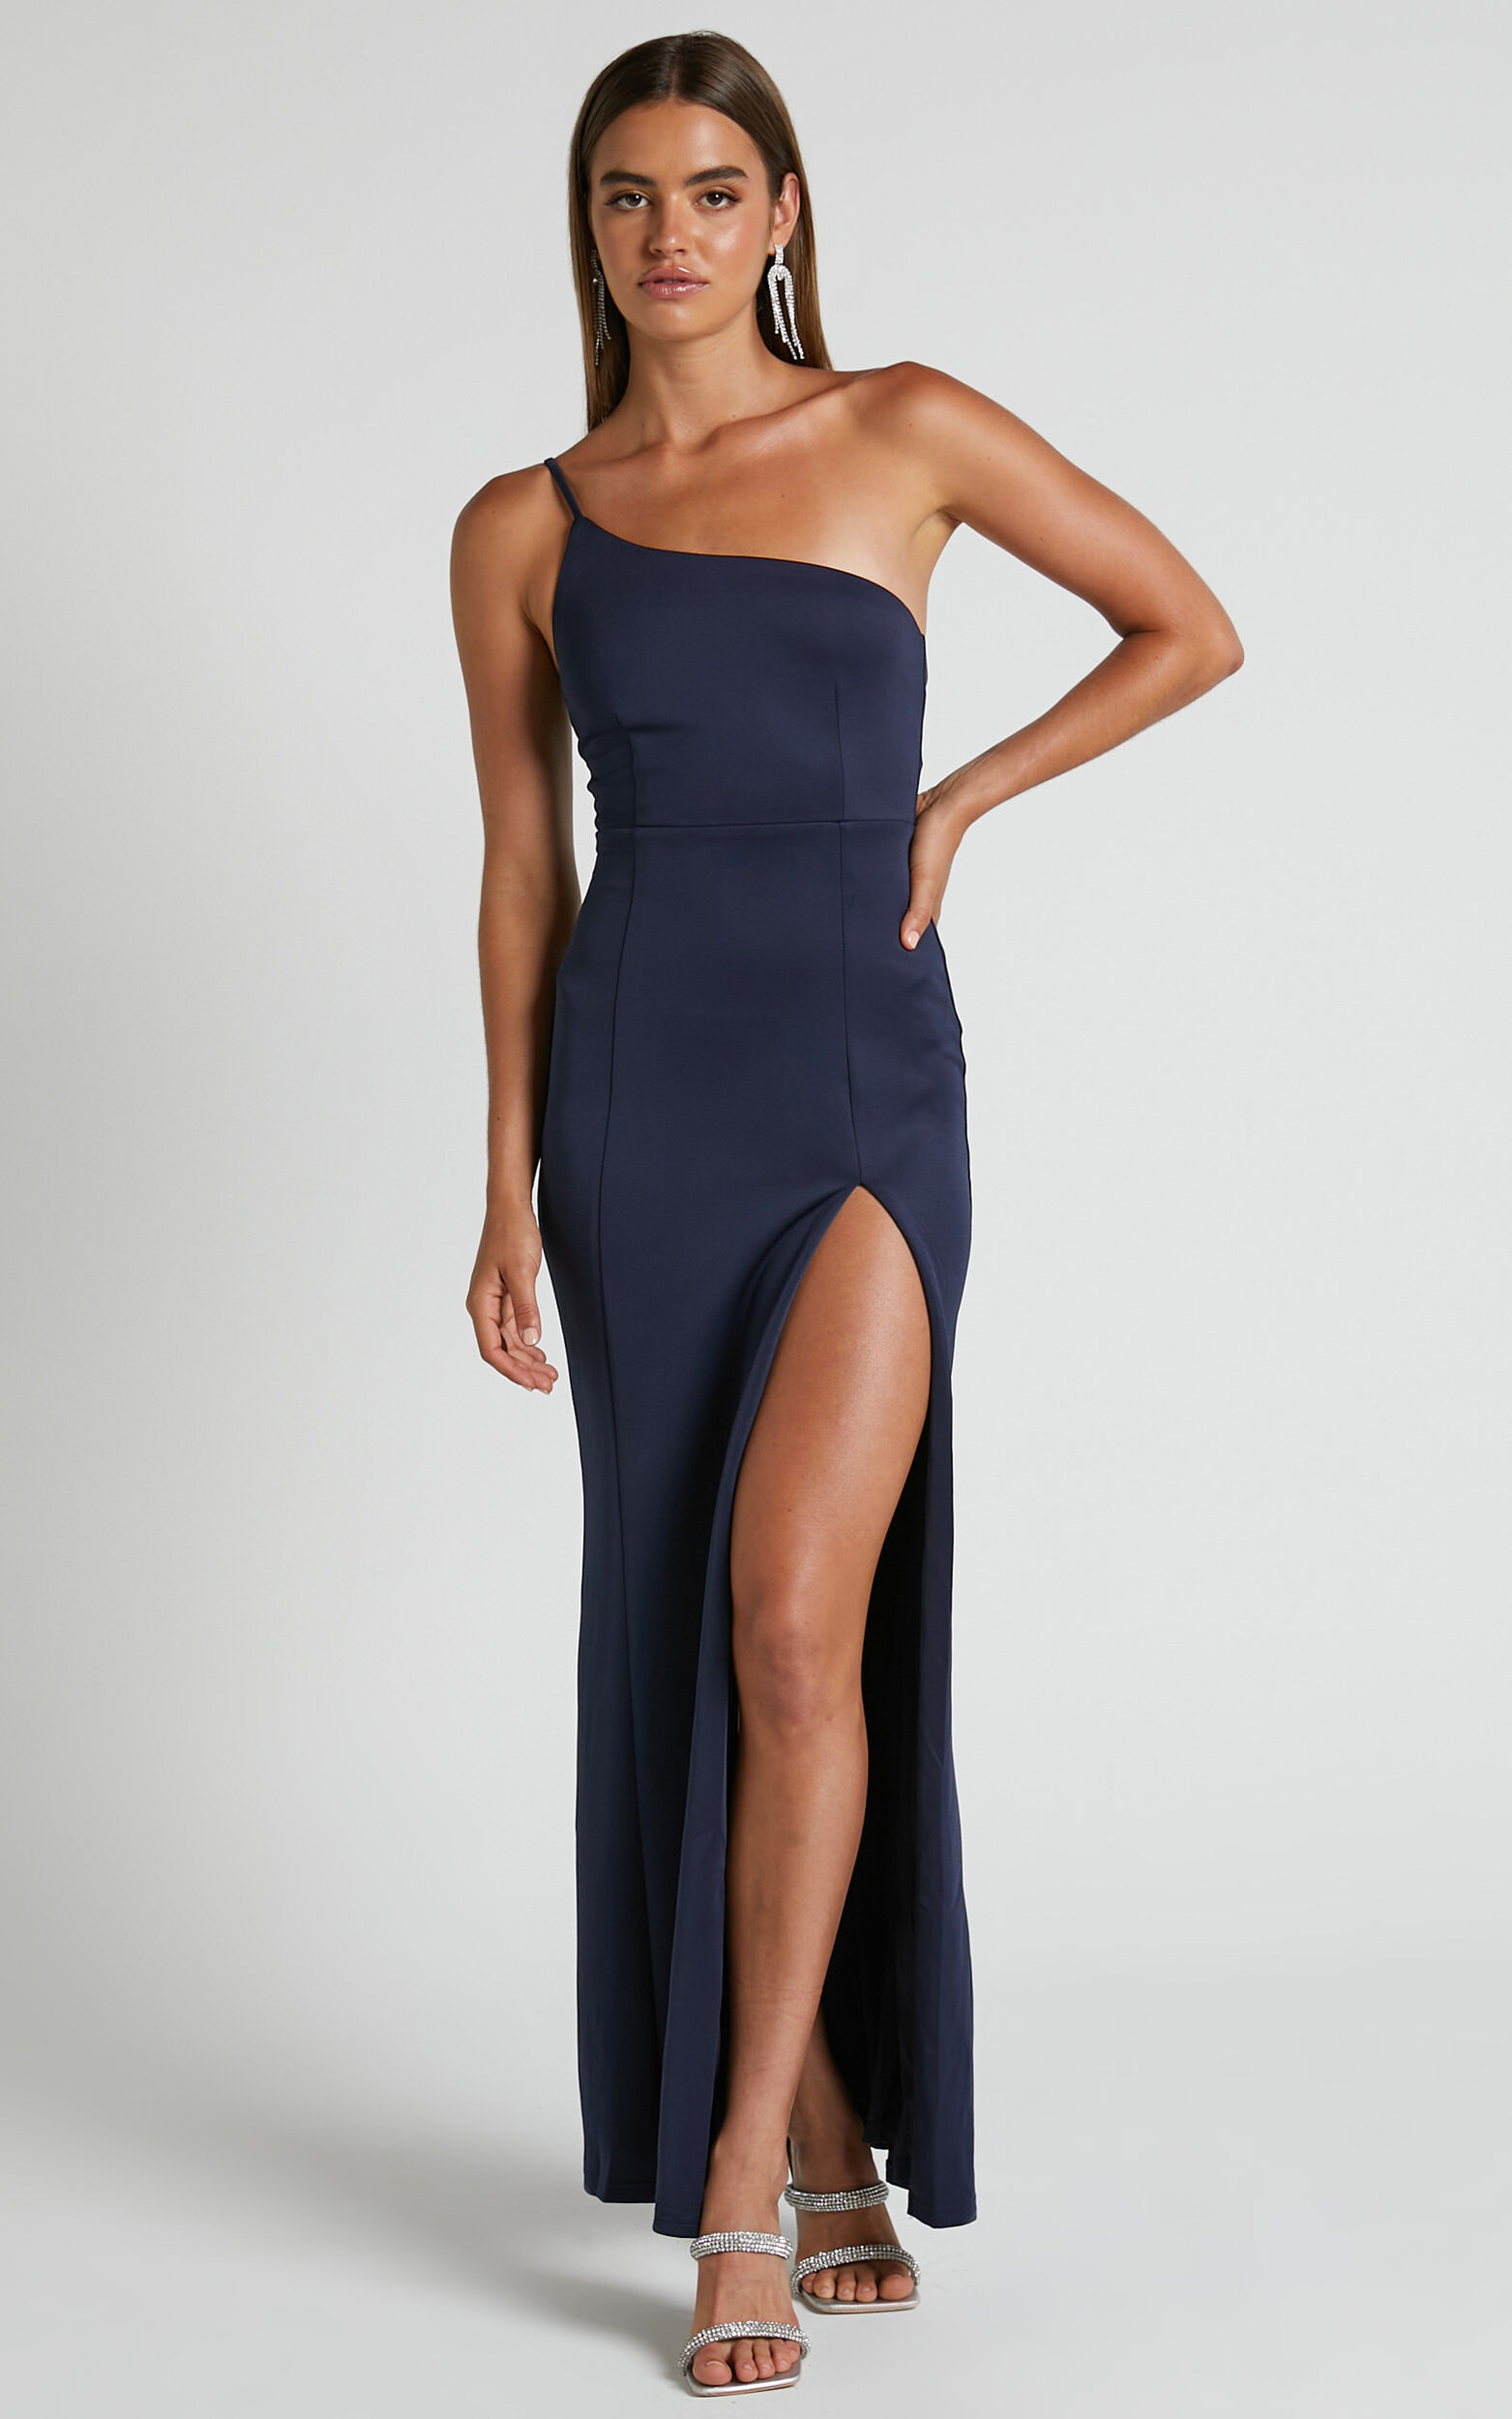 No Ones Fault Midaxi Dress - One Shoulder Thigh Split Dress in Navy - 04, NVY4